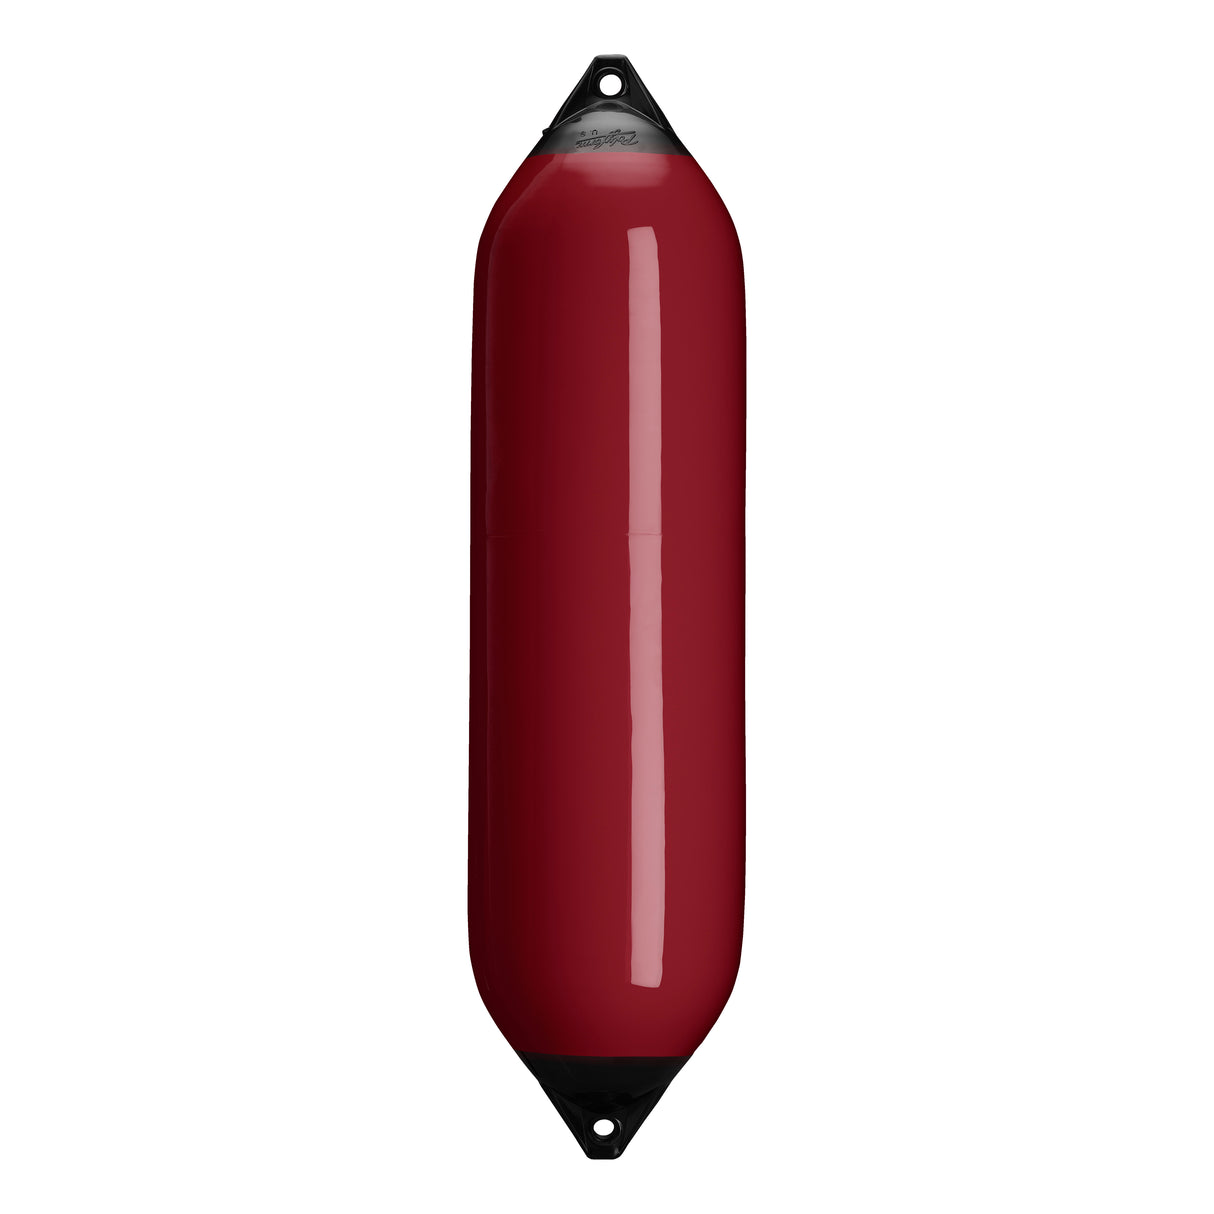 Burgundy boat fender with Navy-Top, Polyform F-8